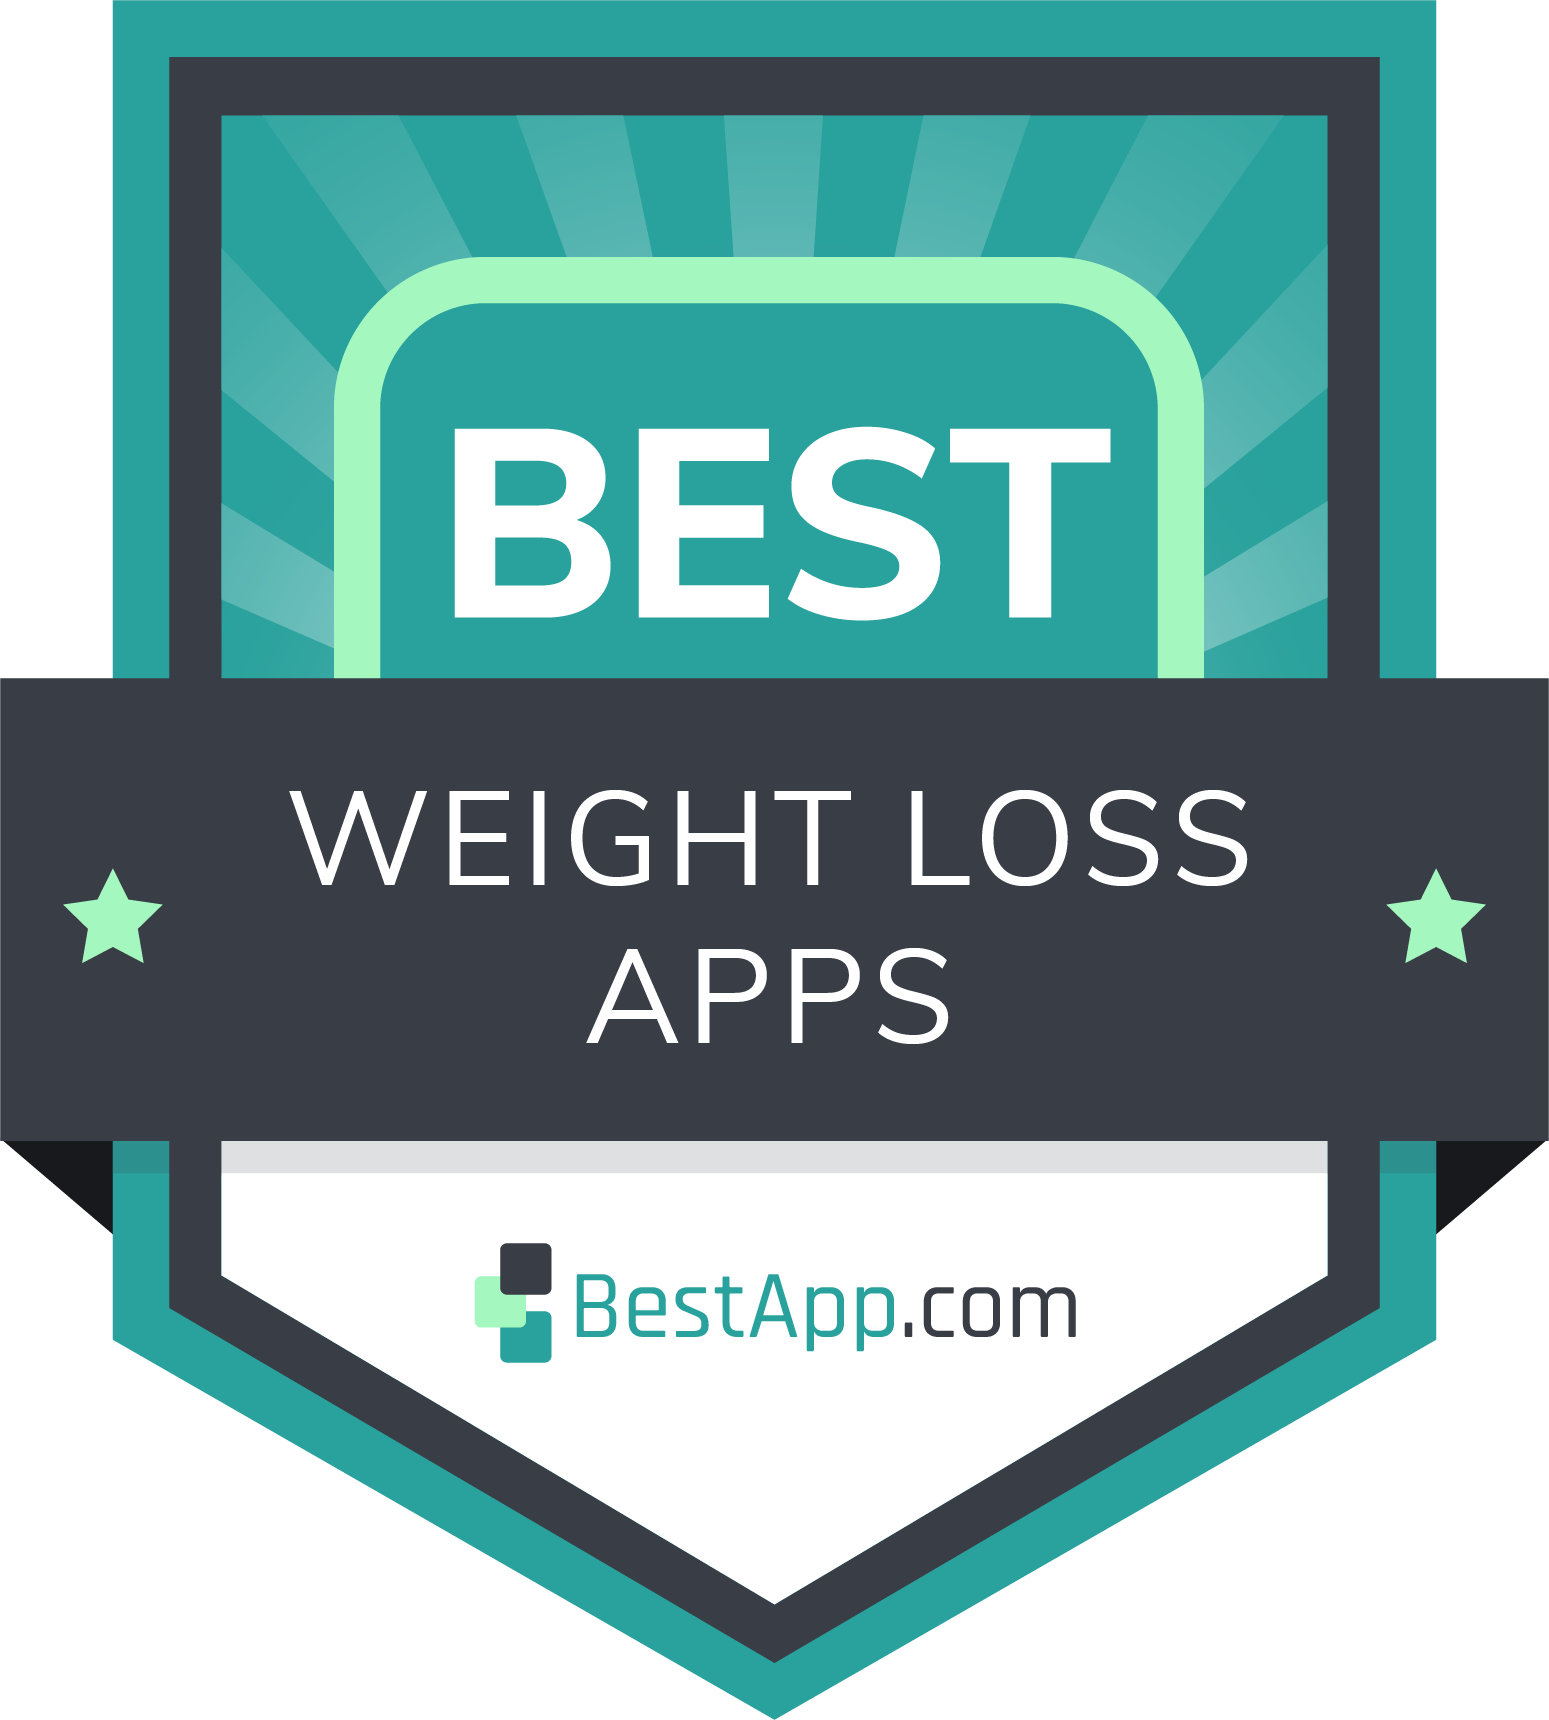 Best Weight Loss Apps Badge